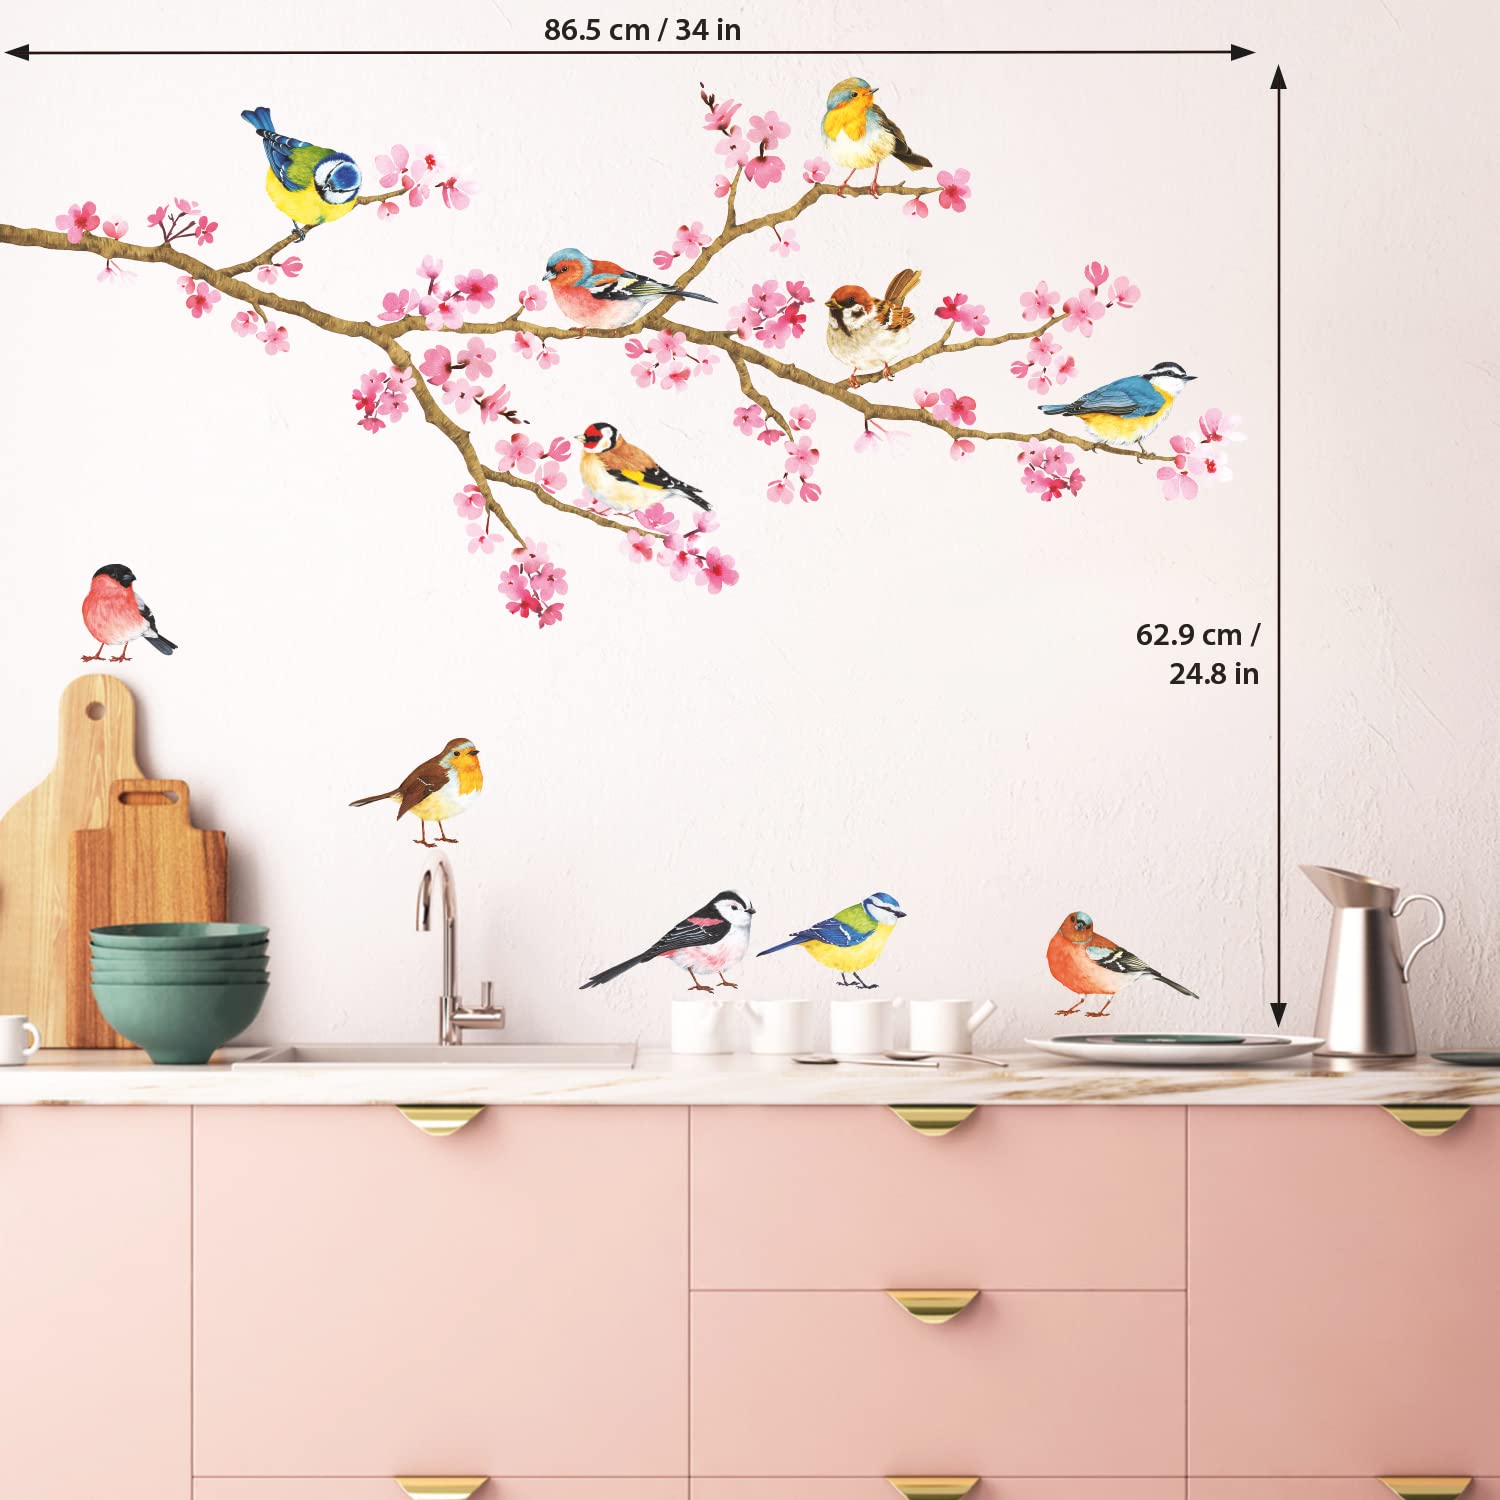 DECOWALL DS-8039 Cherry Blossom & Garden Birds Kids Wall Stickers Wall Decals Peel and Stick Removable Wall Stickers for Kids Nursery Bedroom Living Room (Small) d?cor